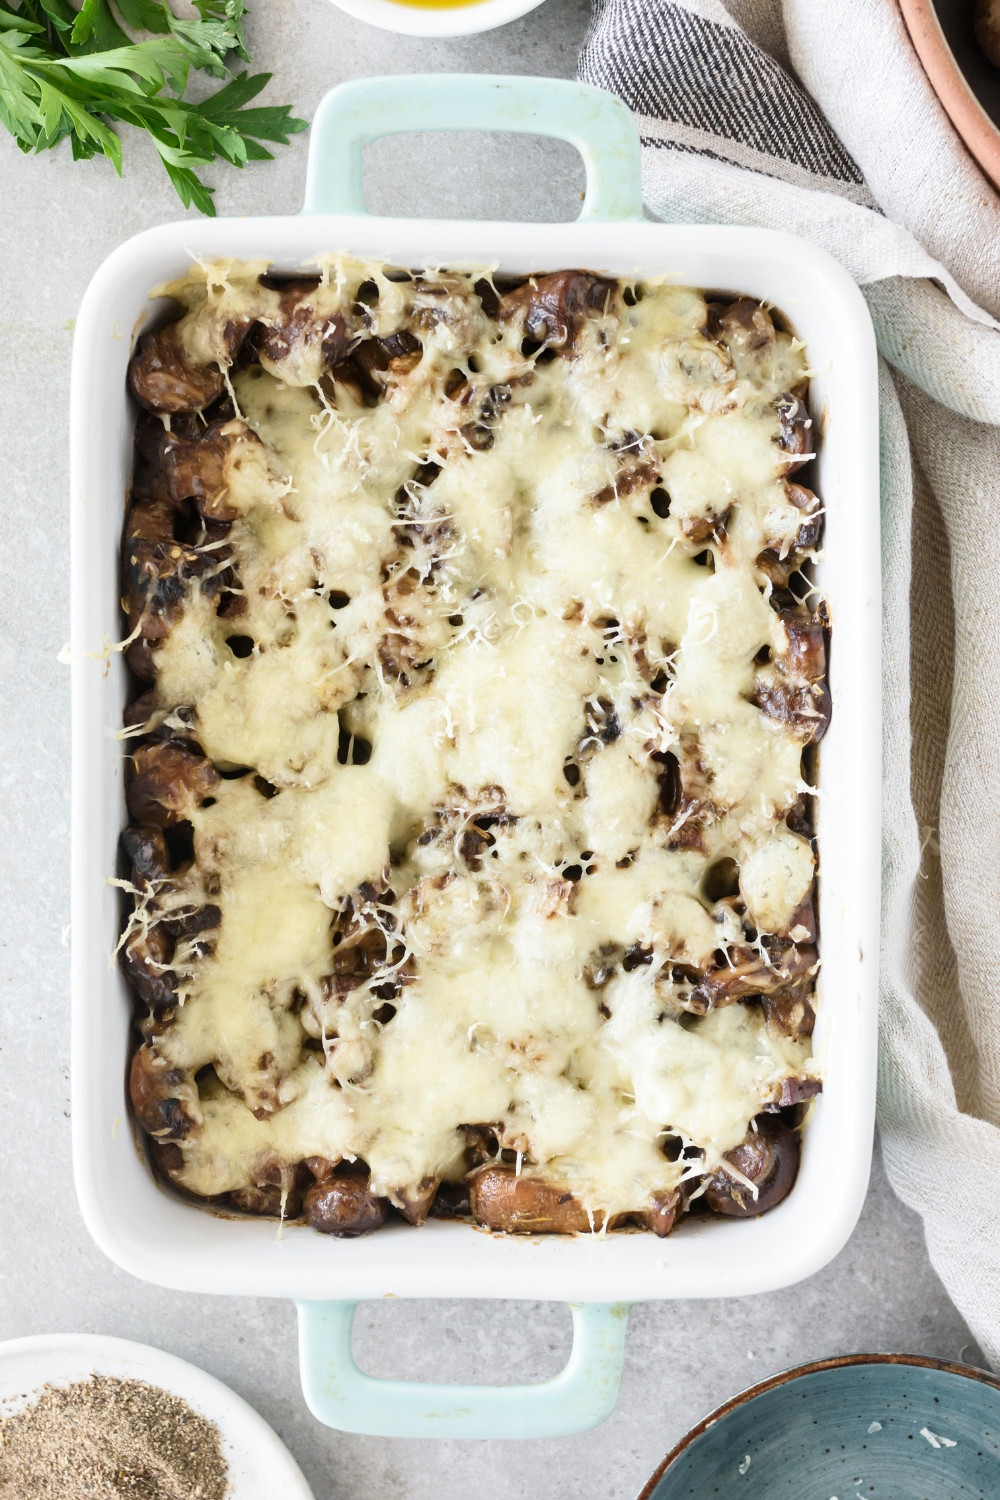 A baking dish filled with freshly baked mushroom casserole covered in melted cheese.